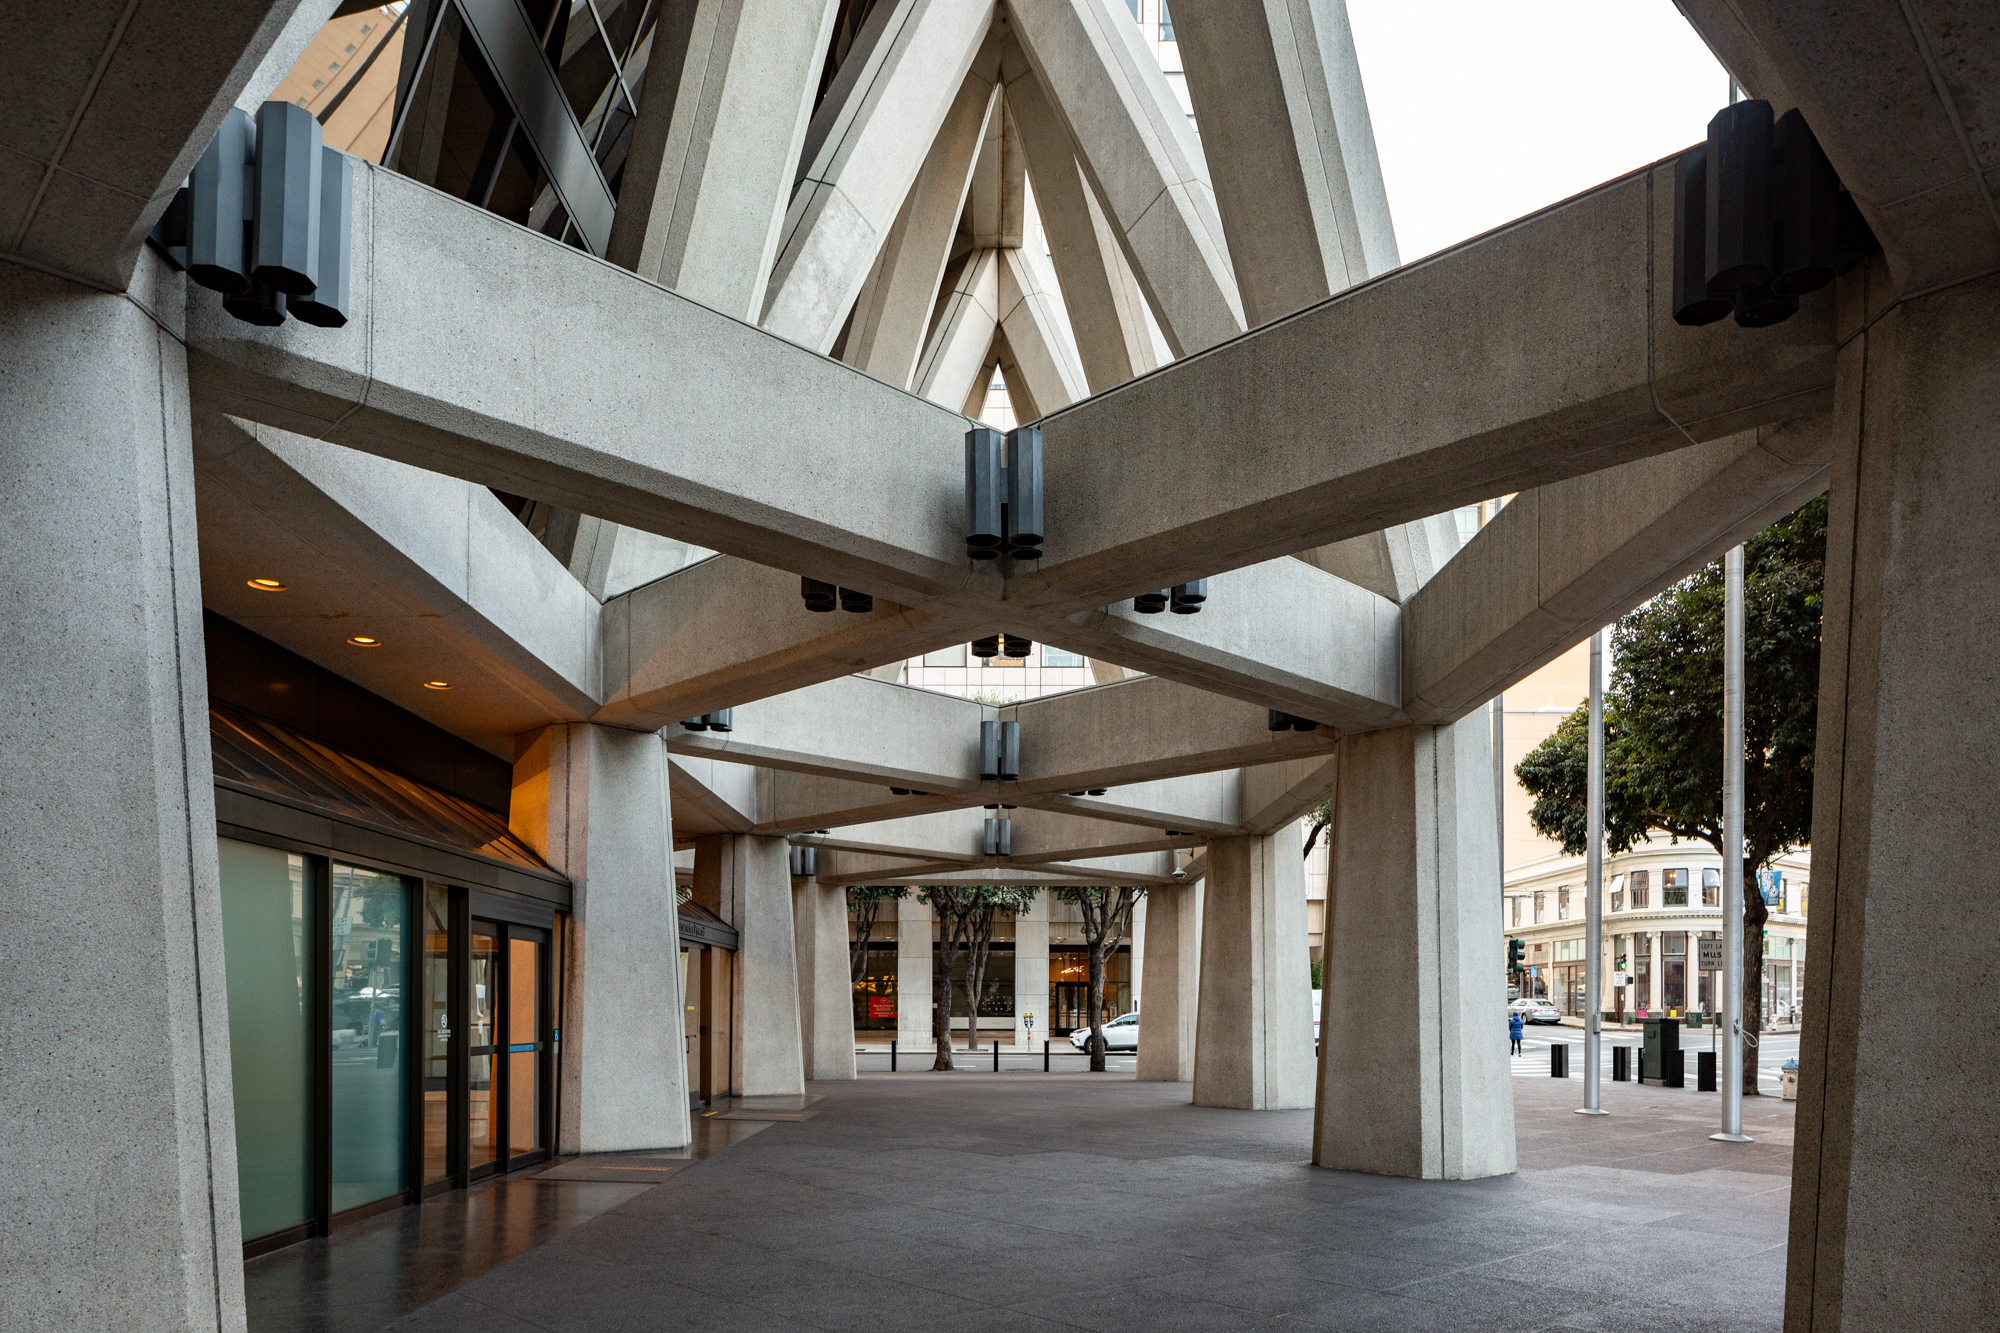 Base of the Transamerica Pyramid, image by Andrew Campbell Nelson